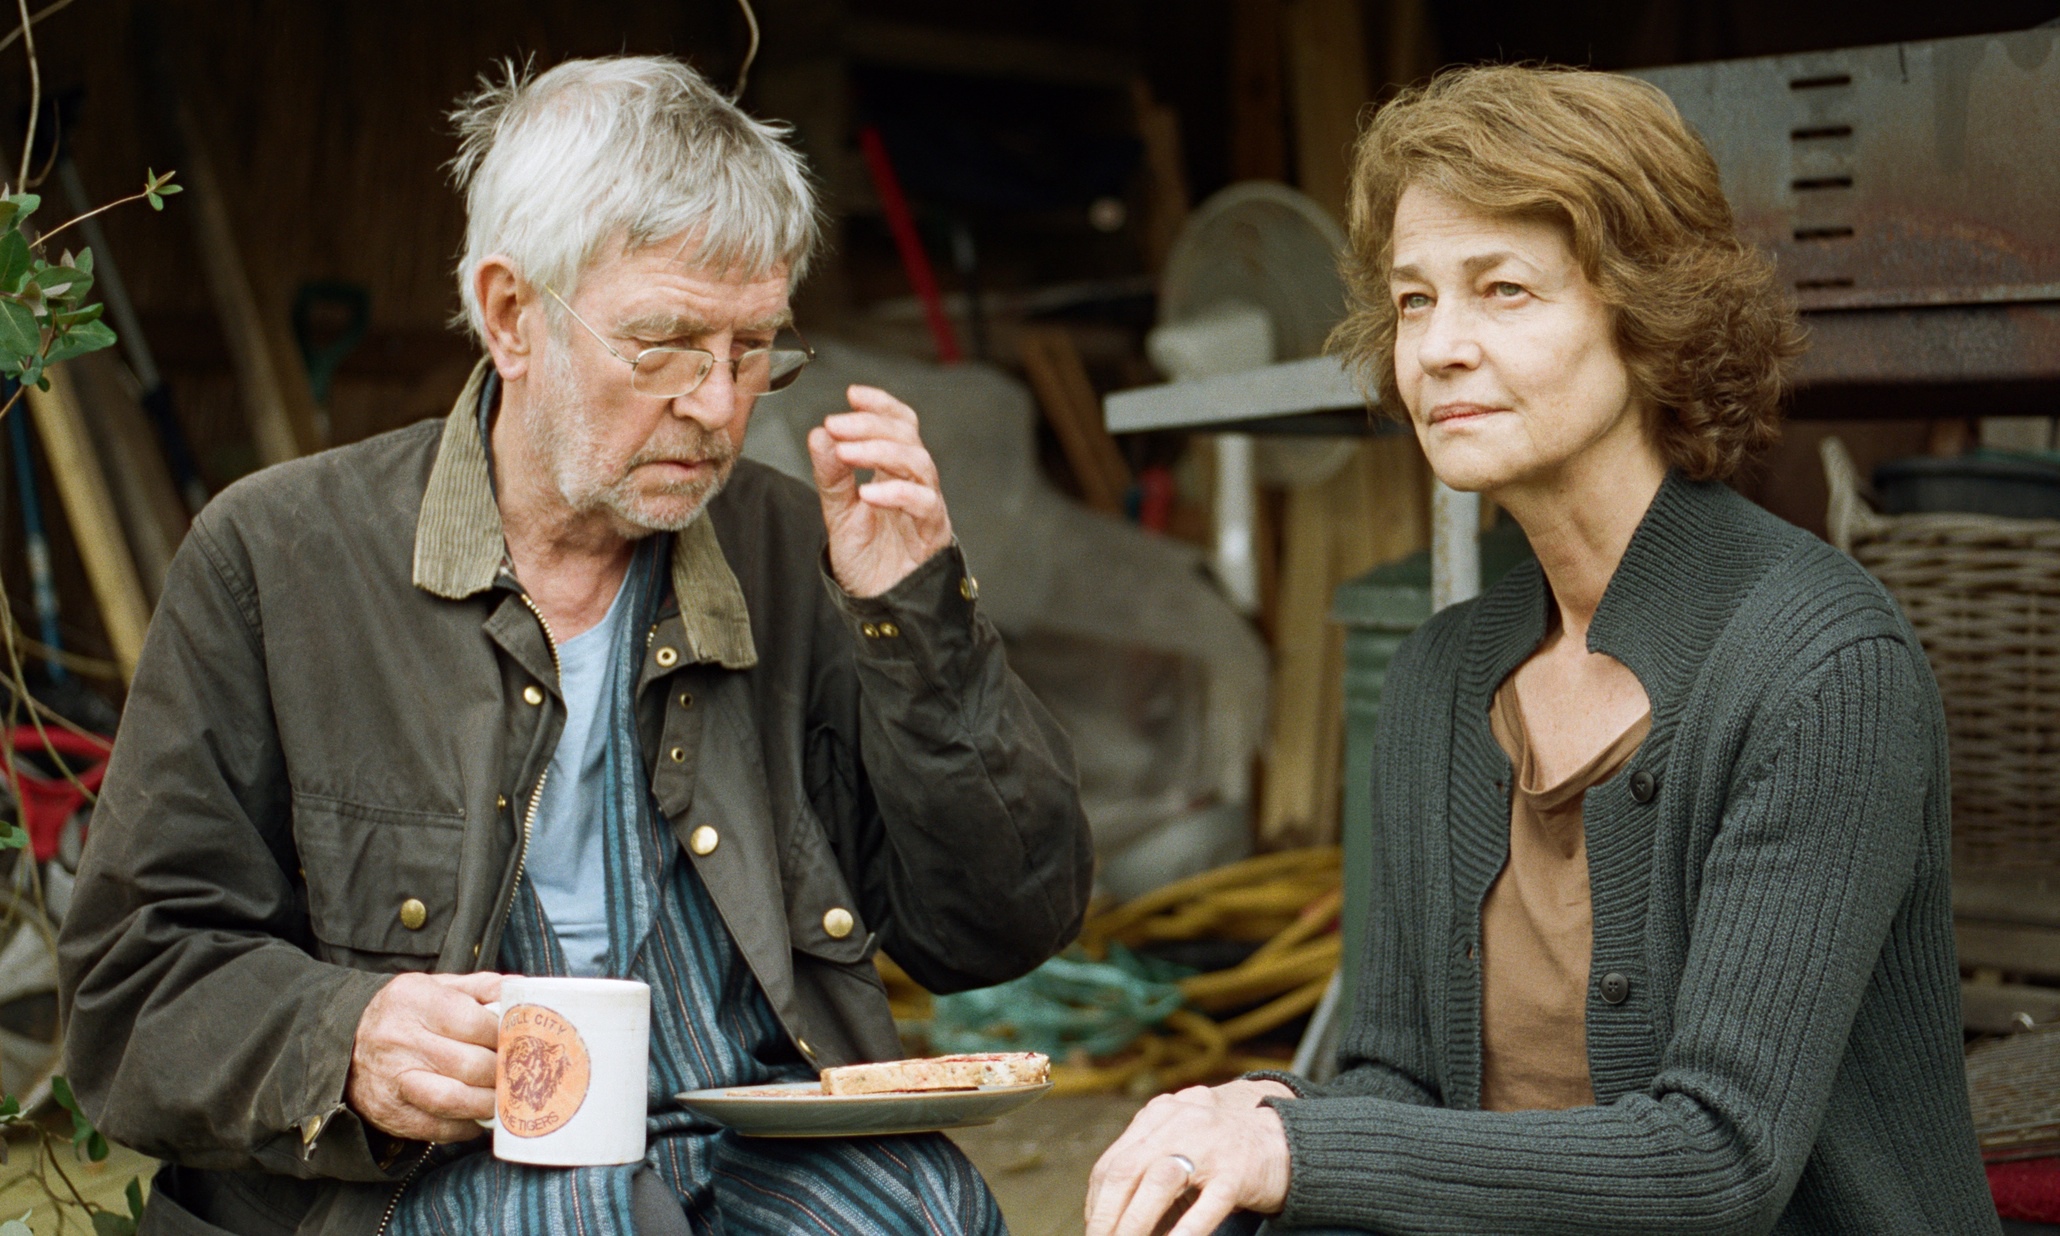 Tom Courtenay and Charlotte Rampling as Geoff and Kate in 45 Years.